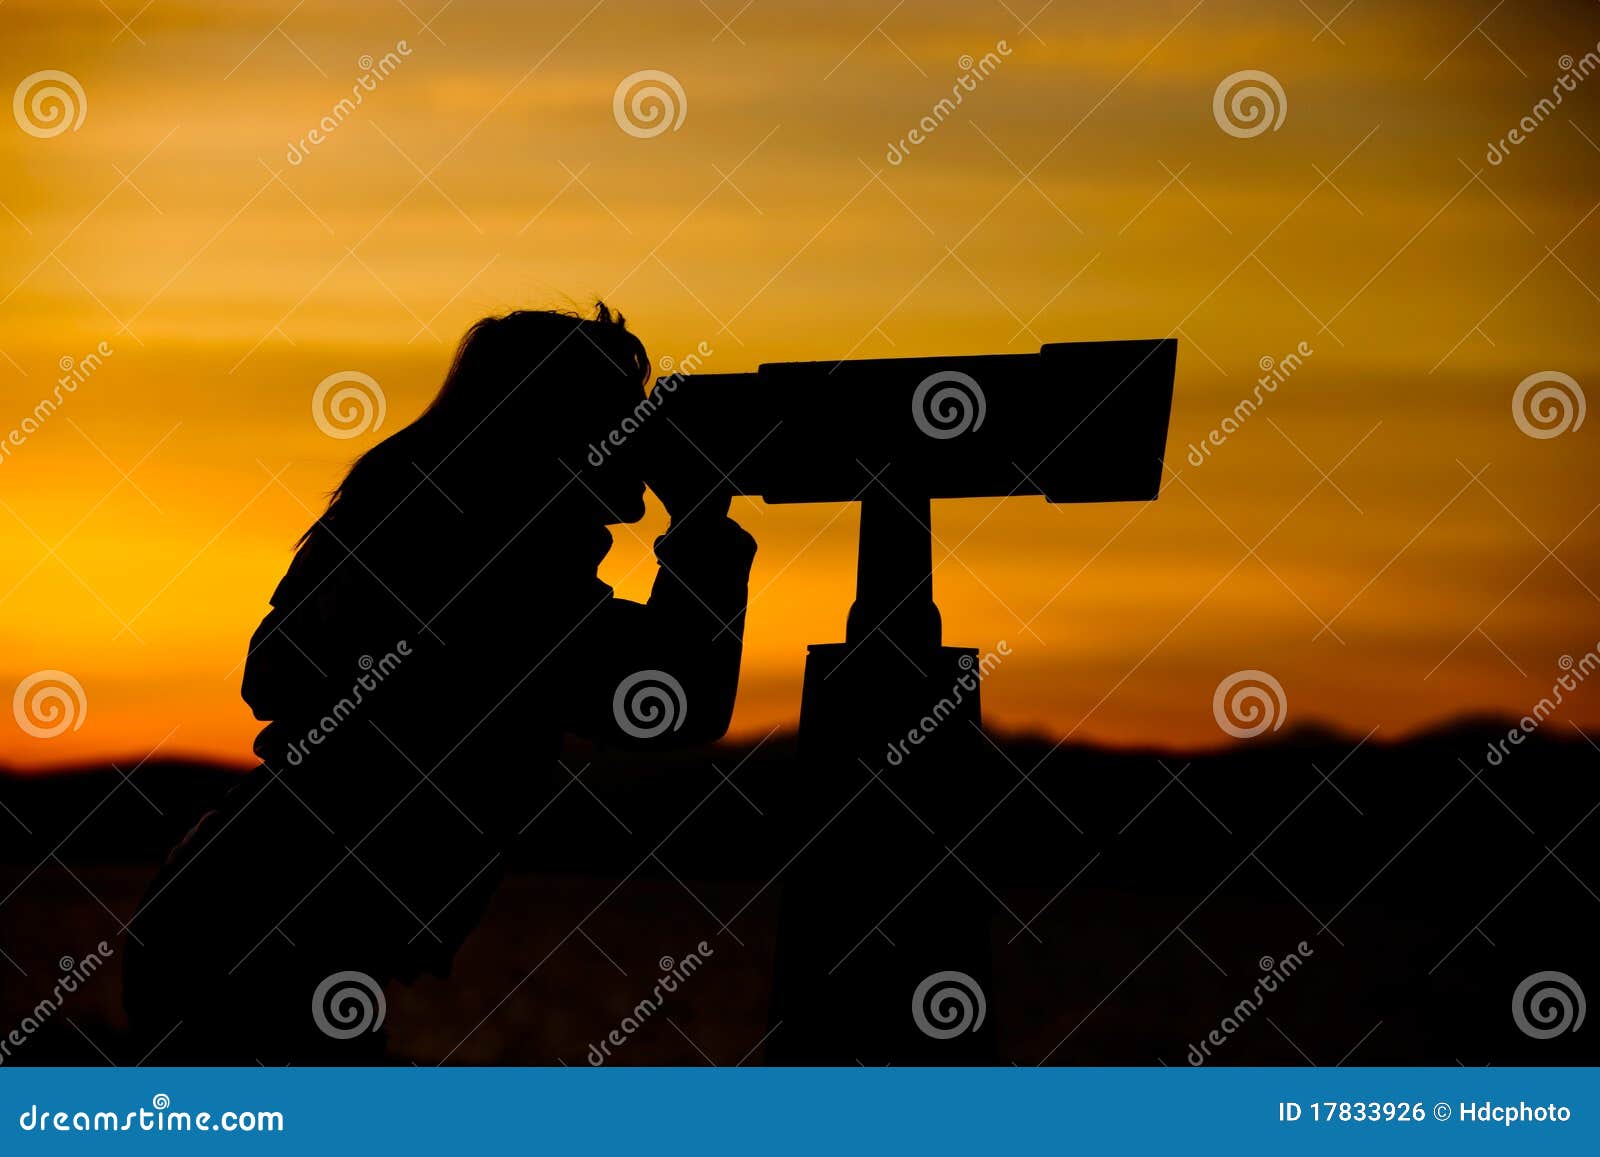 silhouette of woman looking through telescope